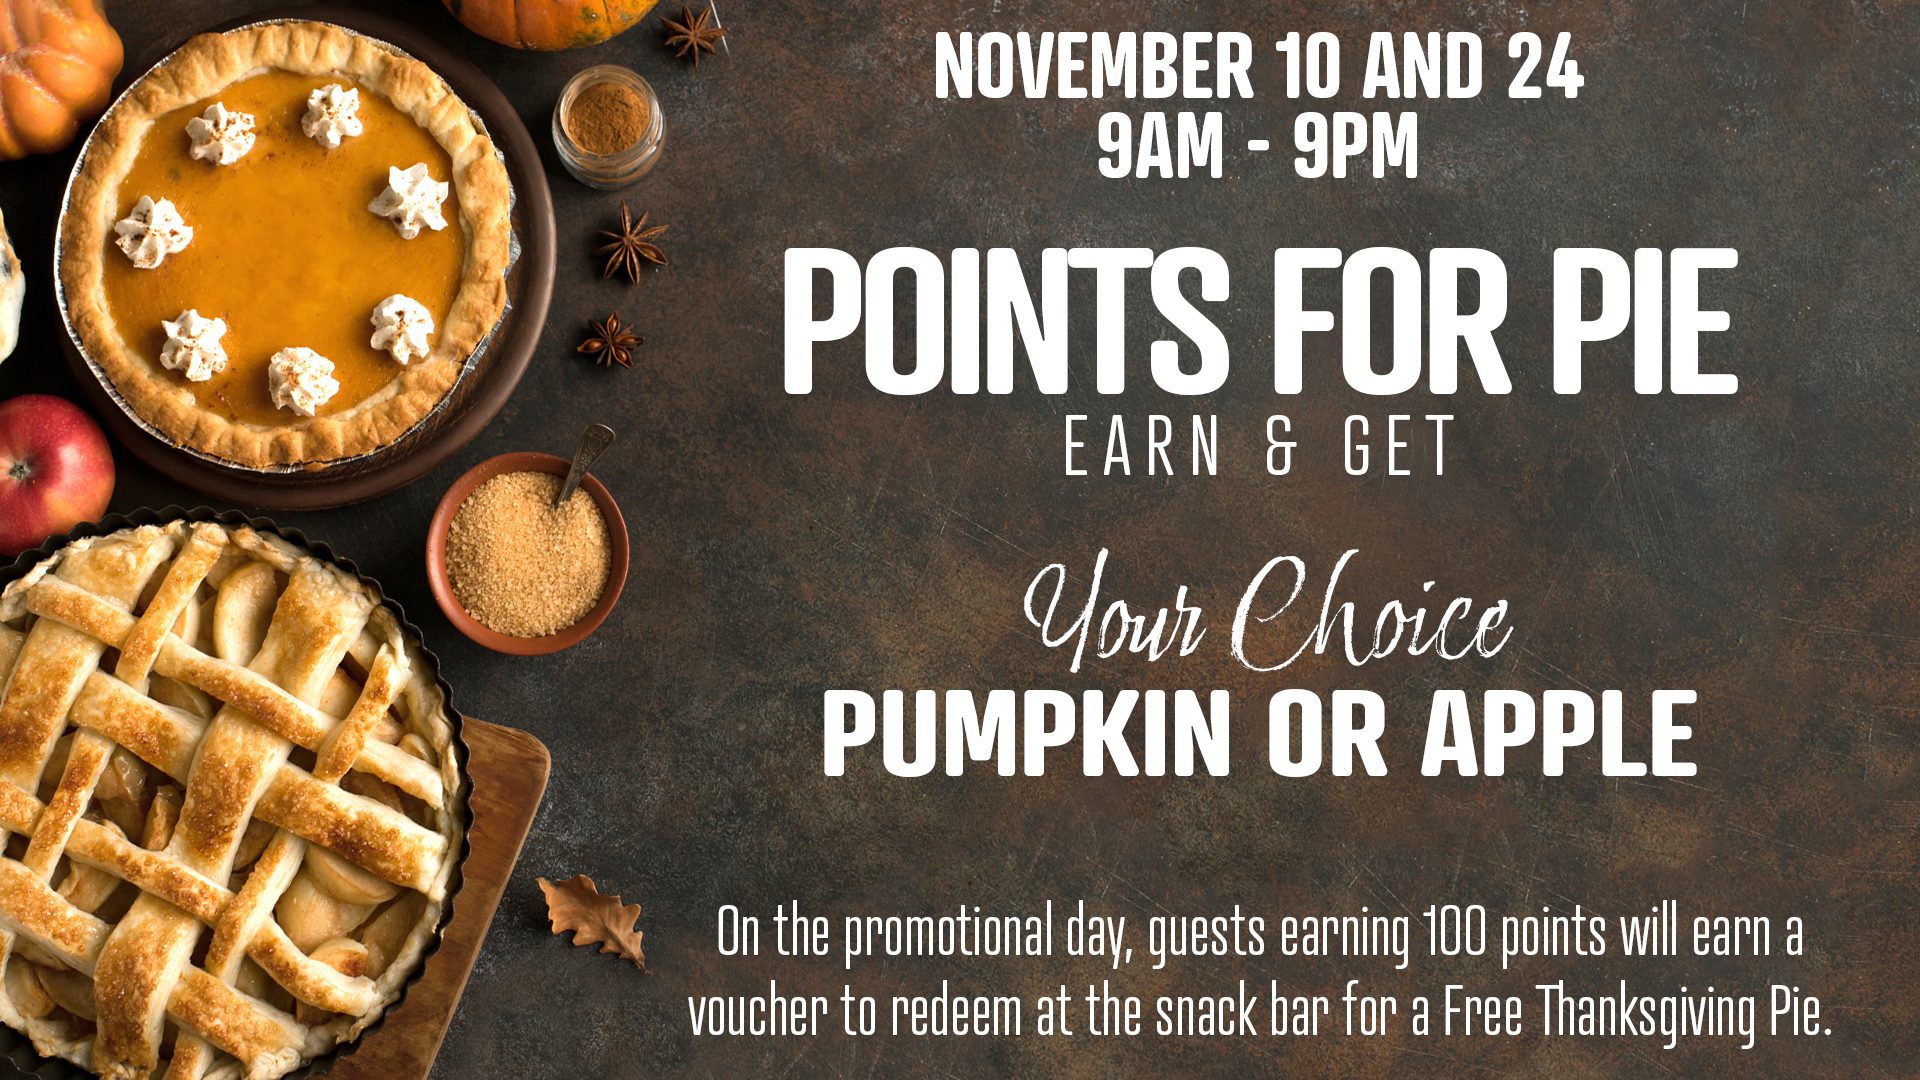 Promotional thanksgiving pie event on november 10 and 24 from 9 am to 9 pm, offering a free pumpkin or apple pie for guests who earn 100 points.